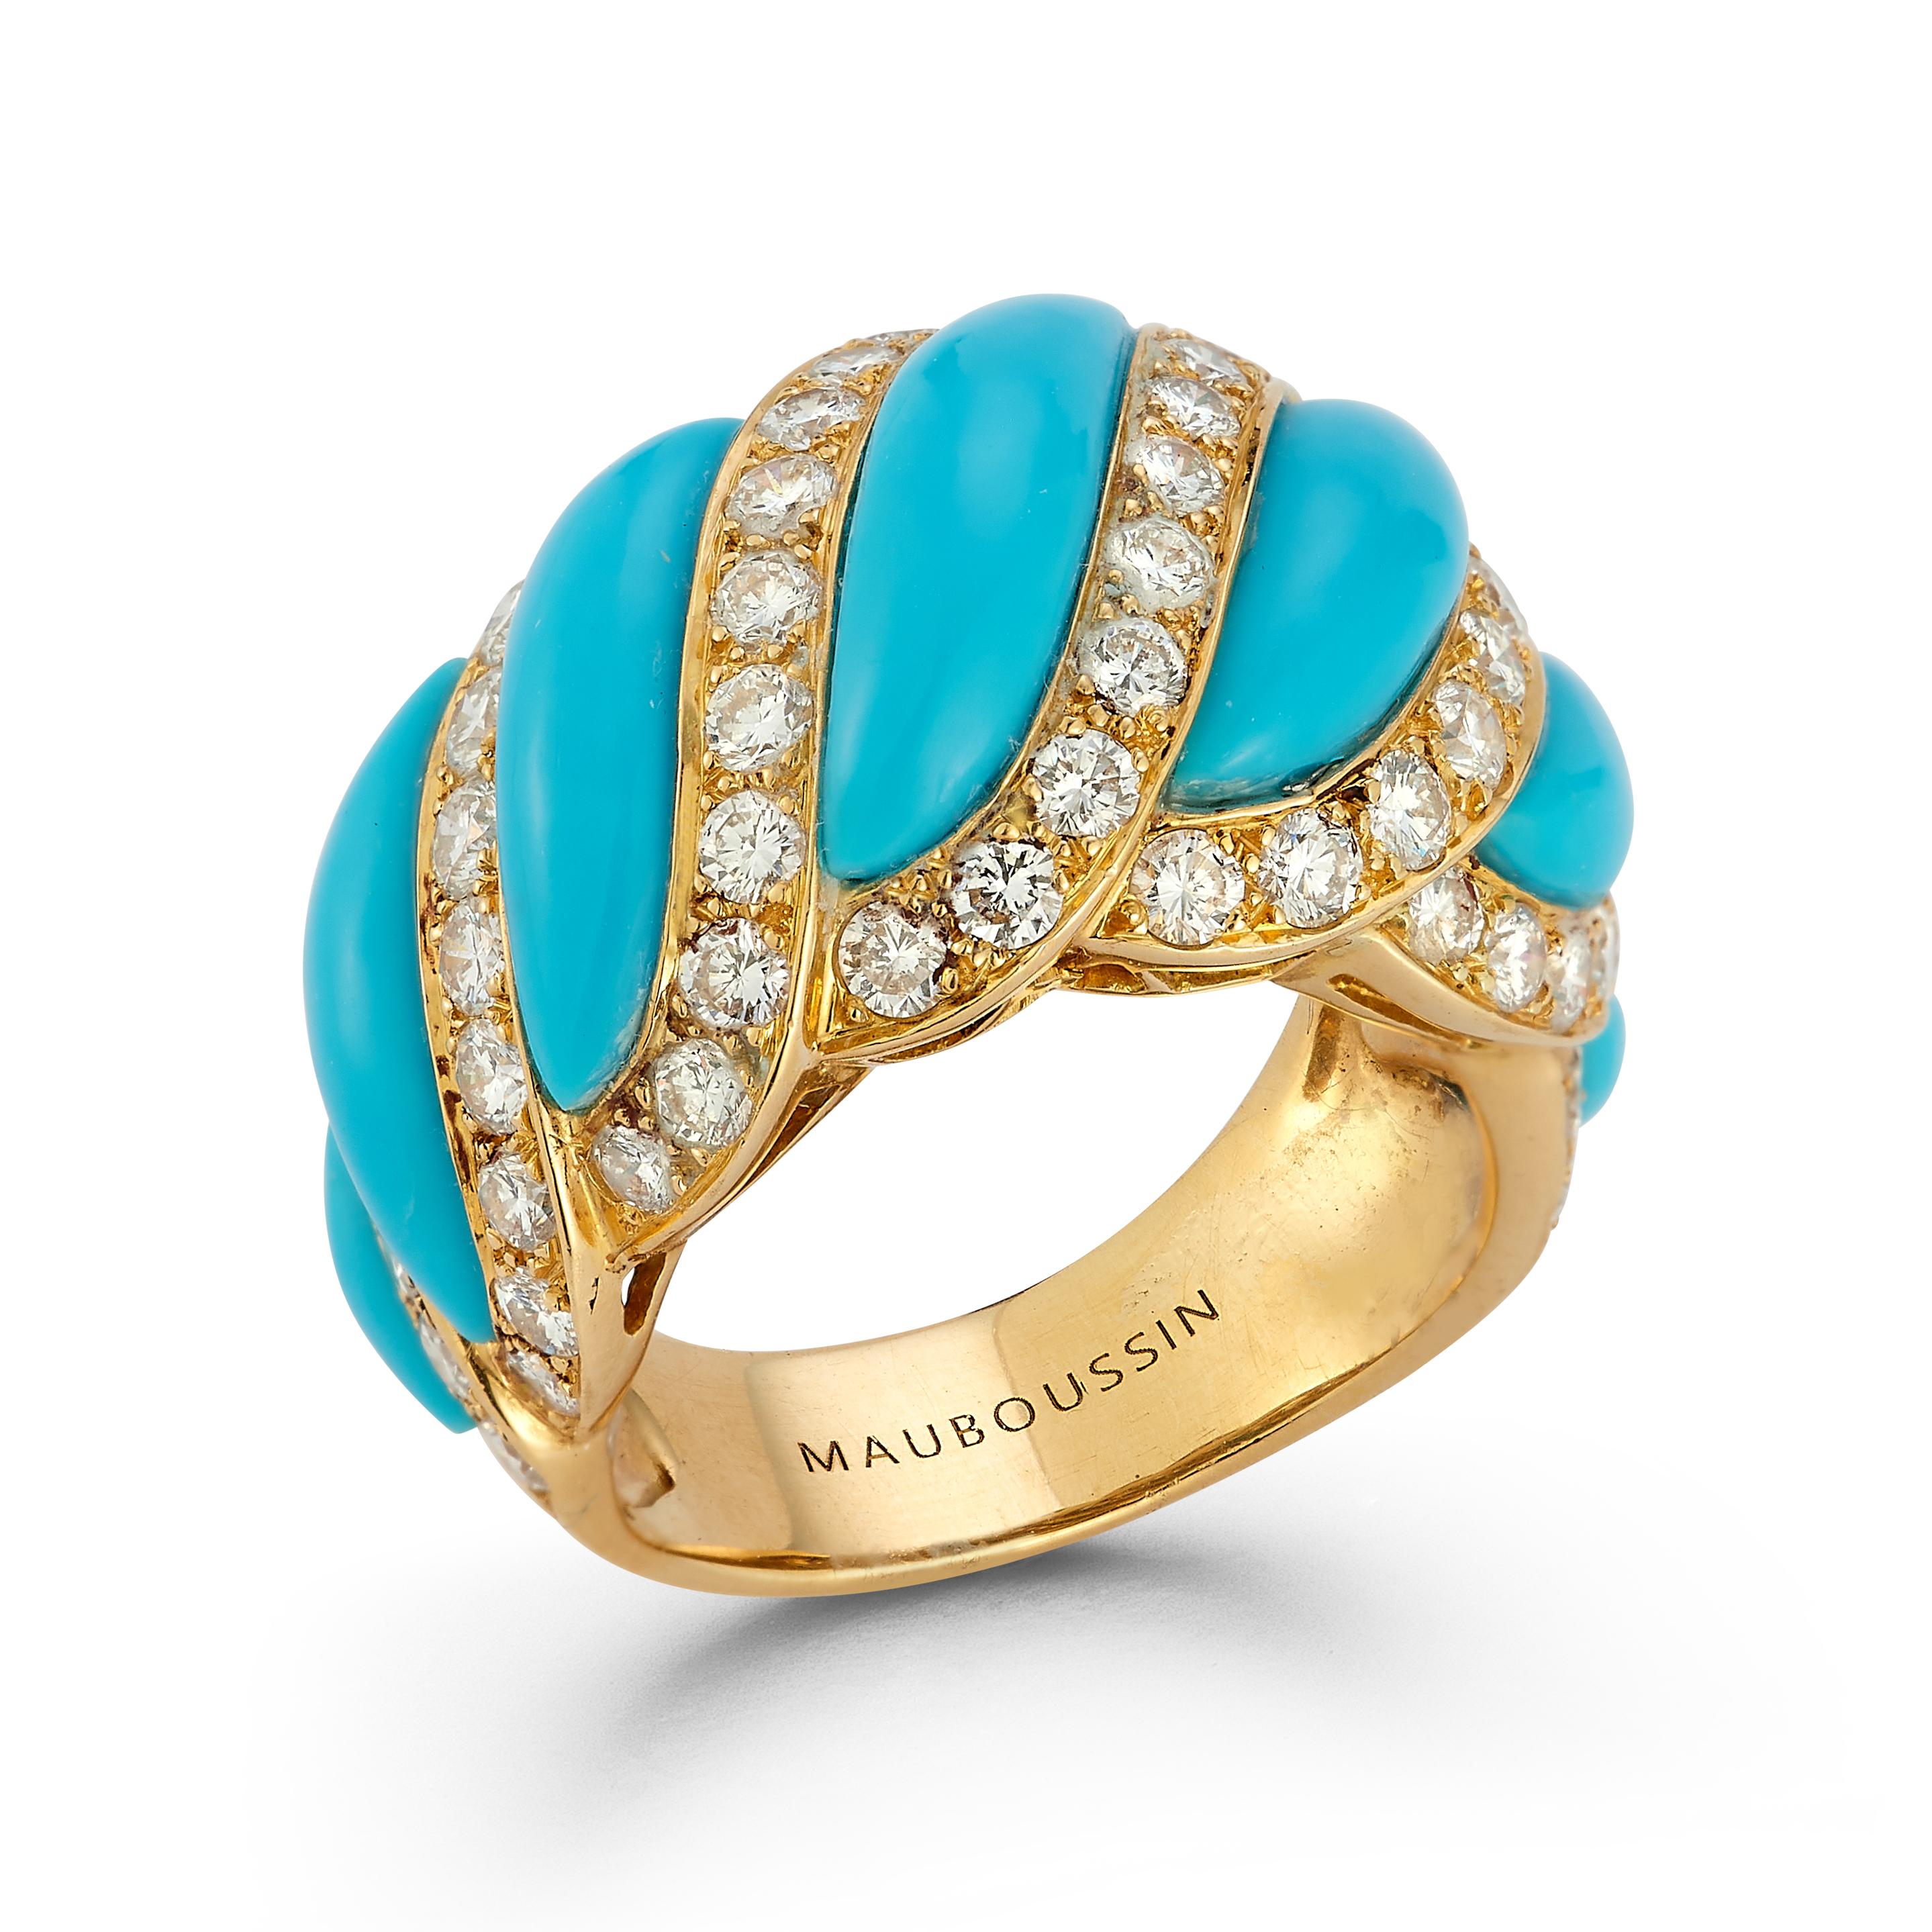 Mauboussin Turquoise & Diamond Ring

An 18 karat yellow gold ring set with a row of cabochon turquoise framed by round cut diamonds

Signed Mauboussin

Ring Size: 8

Resizable free of charge 